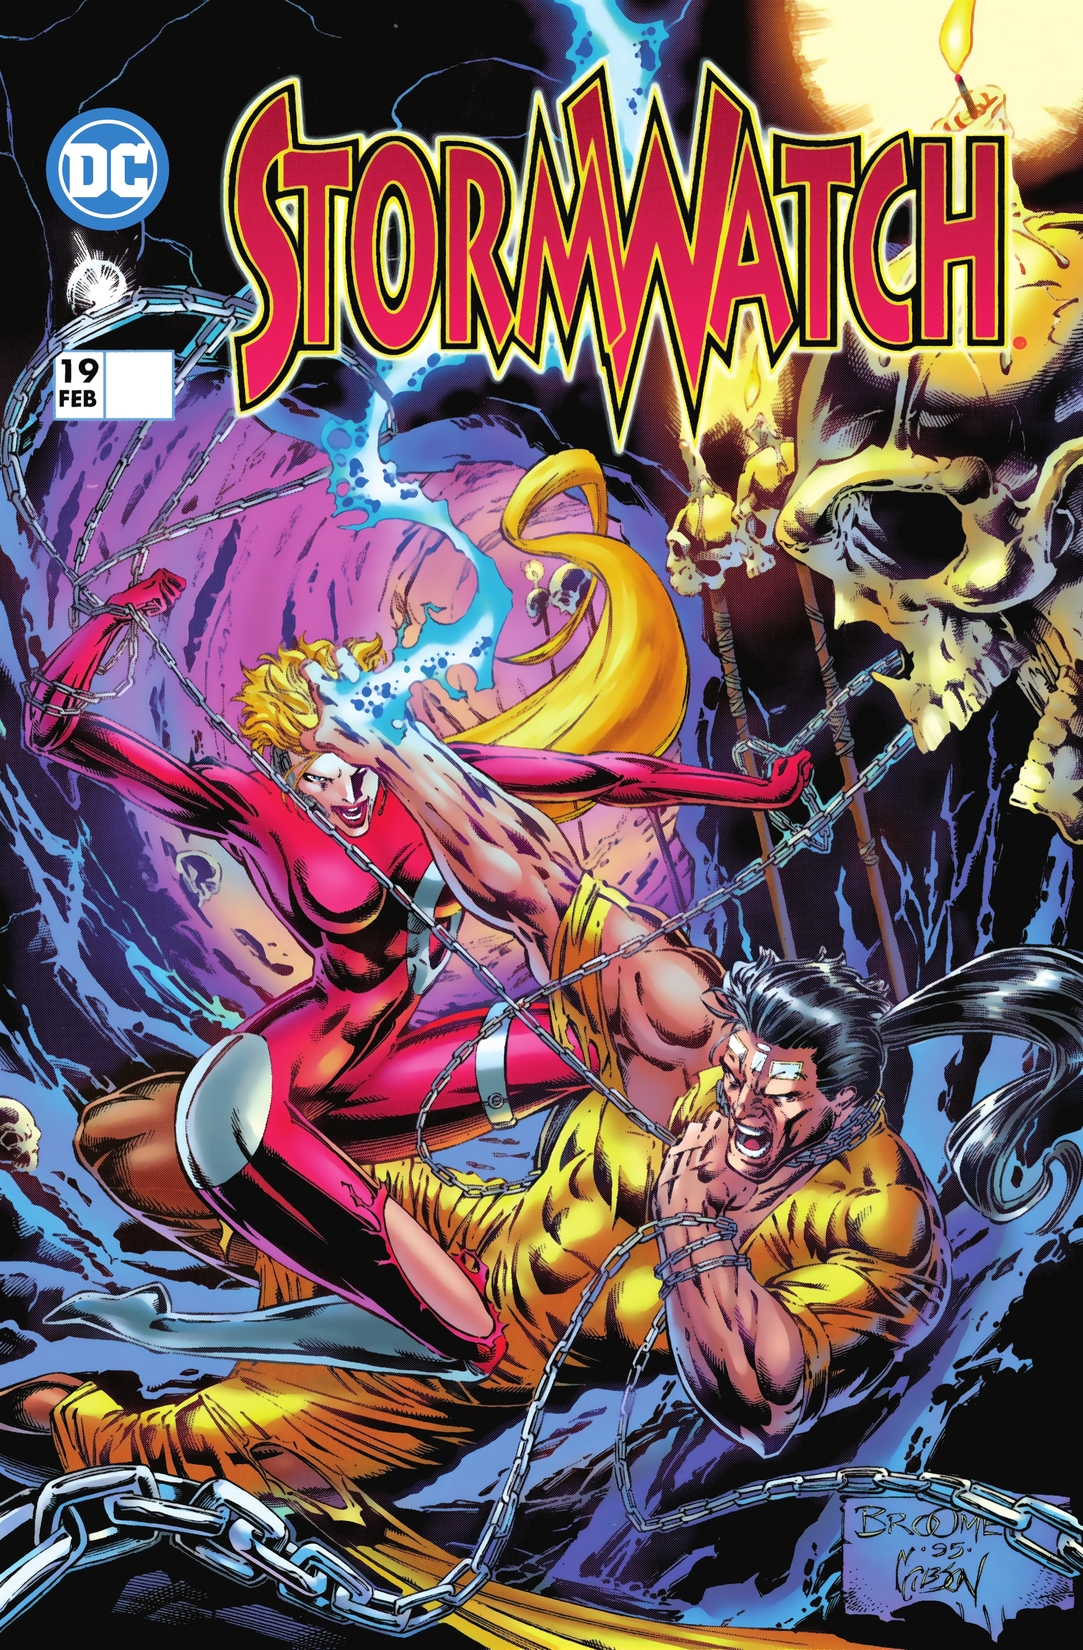 Stormwatch (1993-1997) #19 preview images